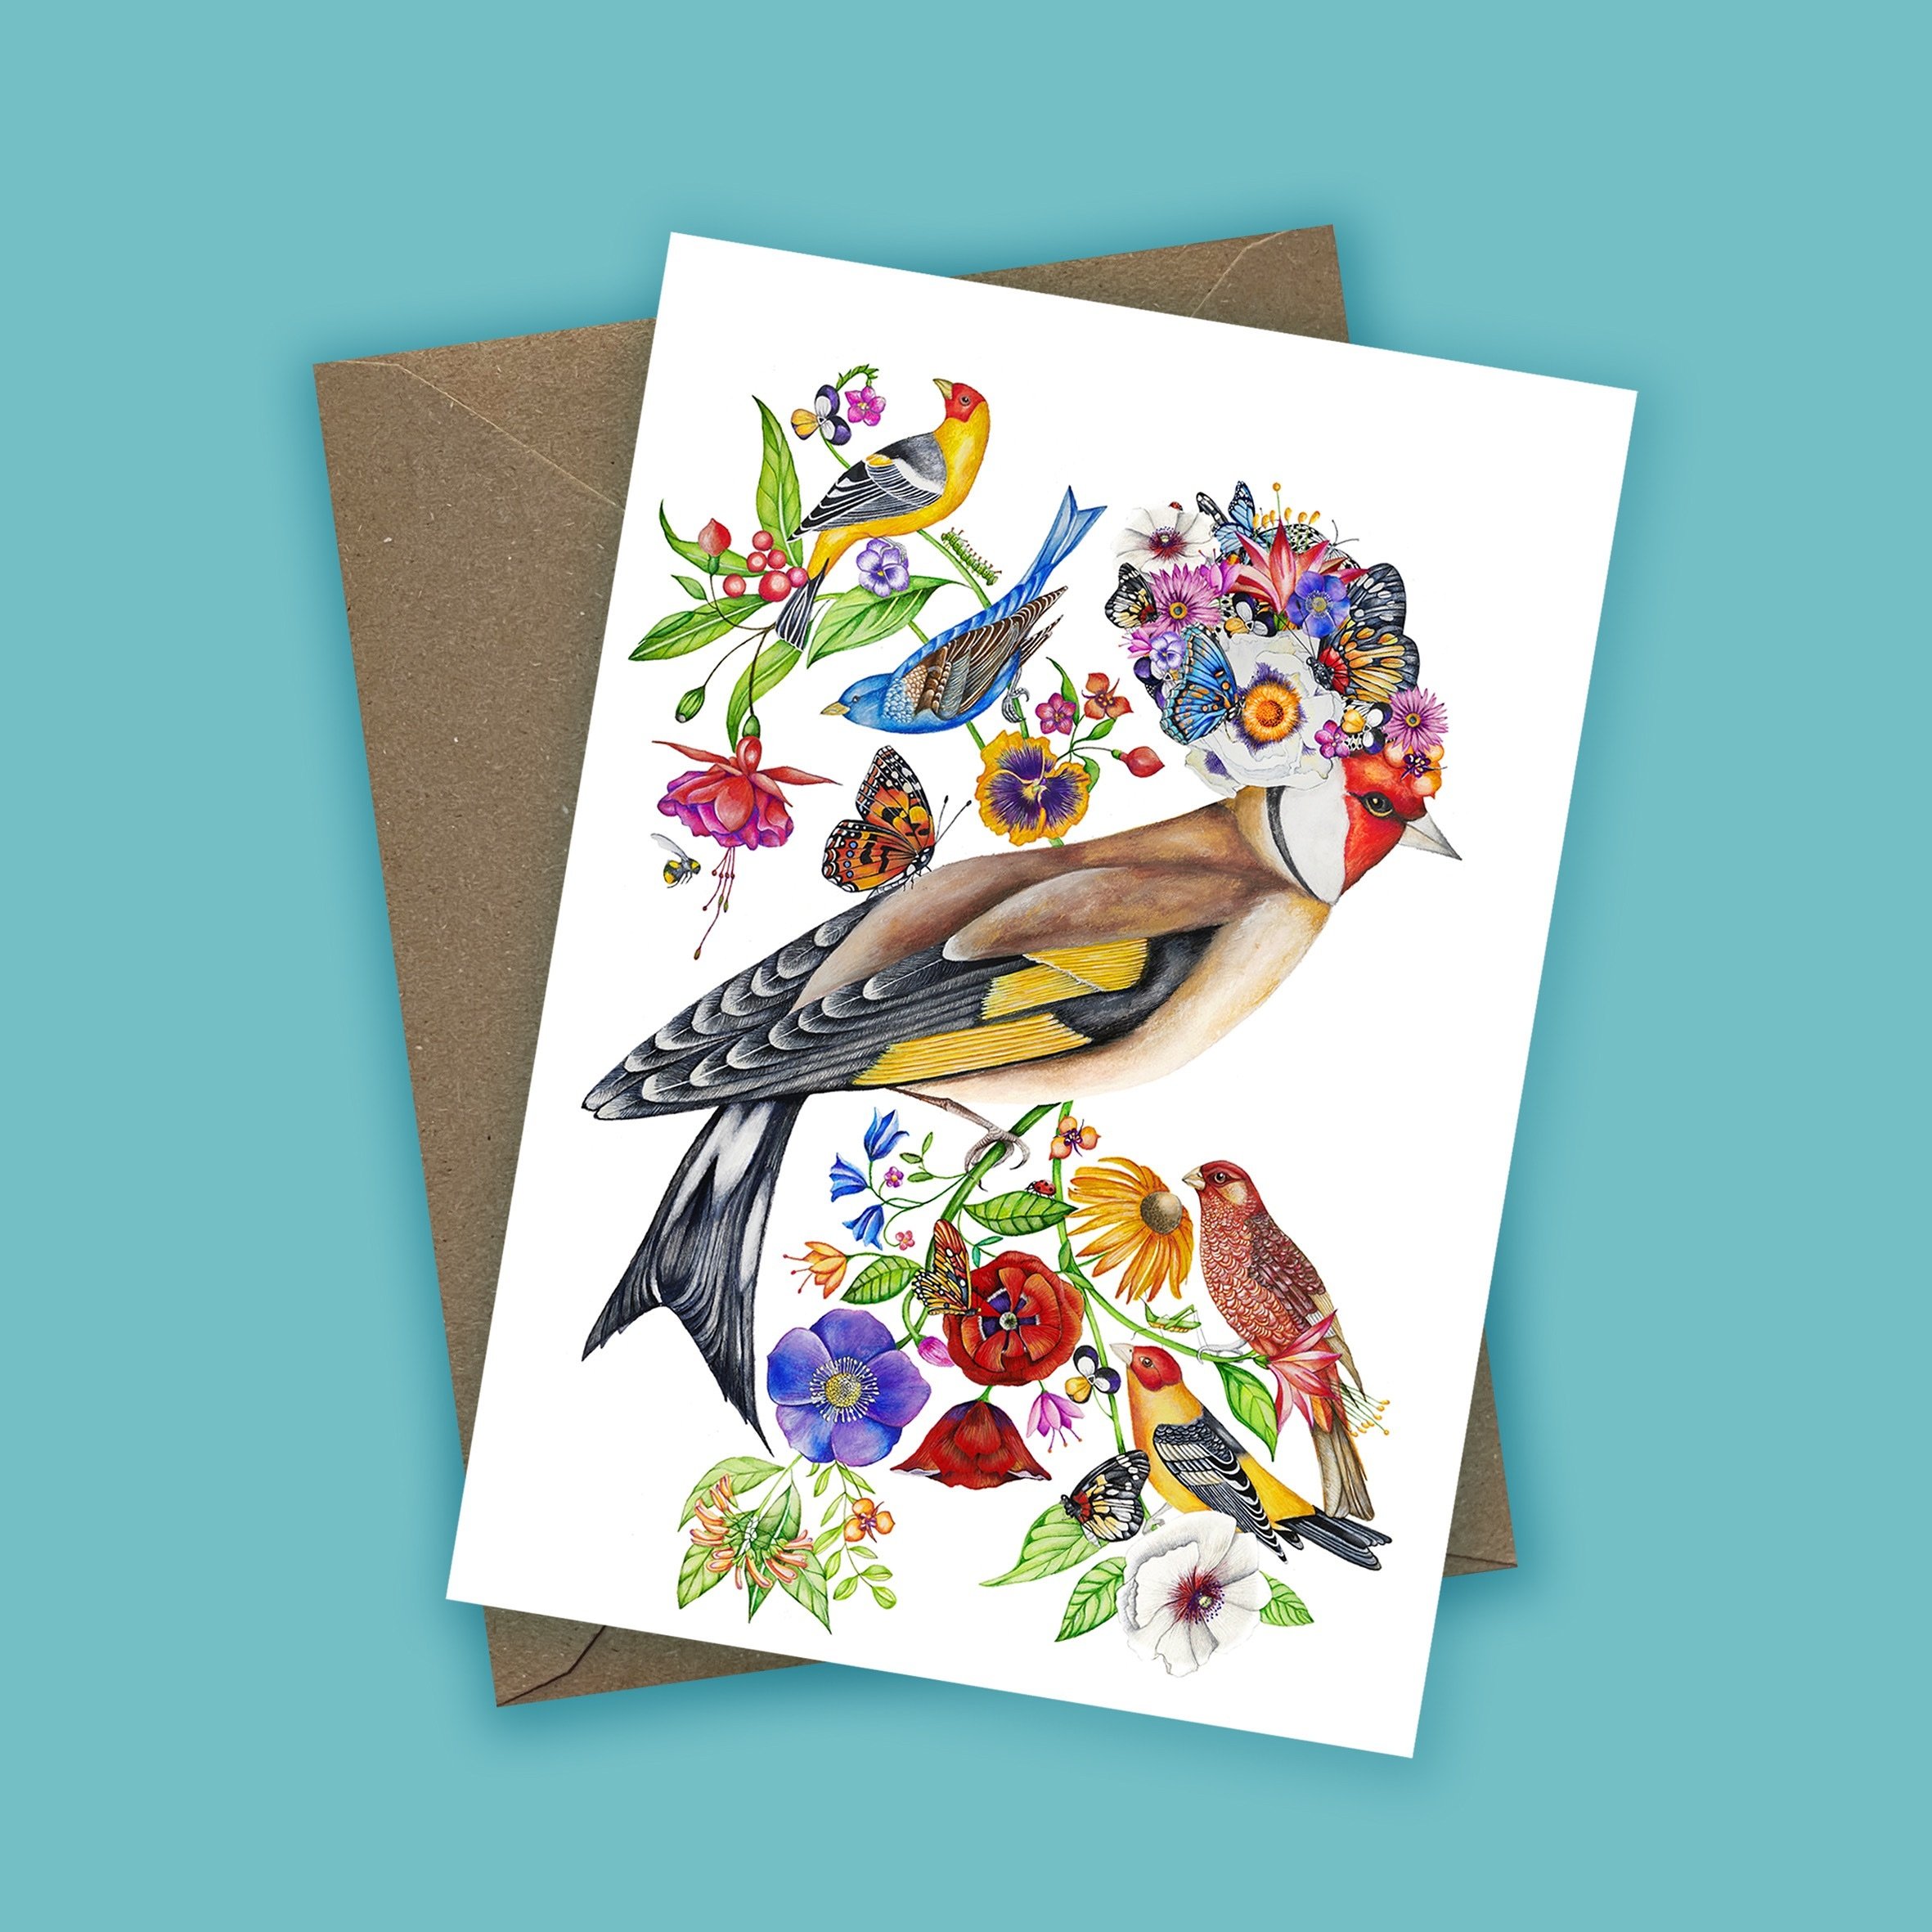 naturalquirkscollection
NEW LAUNCH of Fine Art Cards❤️❤️❤️❤️

Natural Quirks Fine Art Cards Collection 

Now all of my limited edition prints are created as Fine Art Cards now for sale on the website. 
https://naturalquirks.com/art-cards

Art Cards

